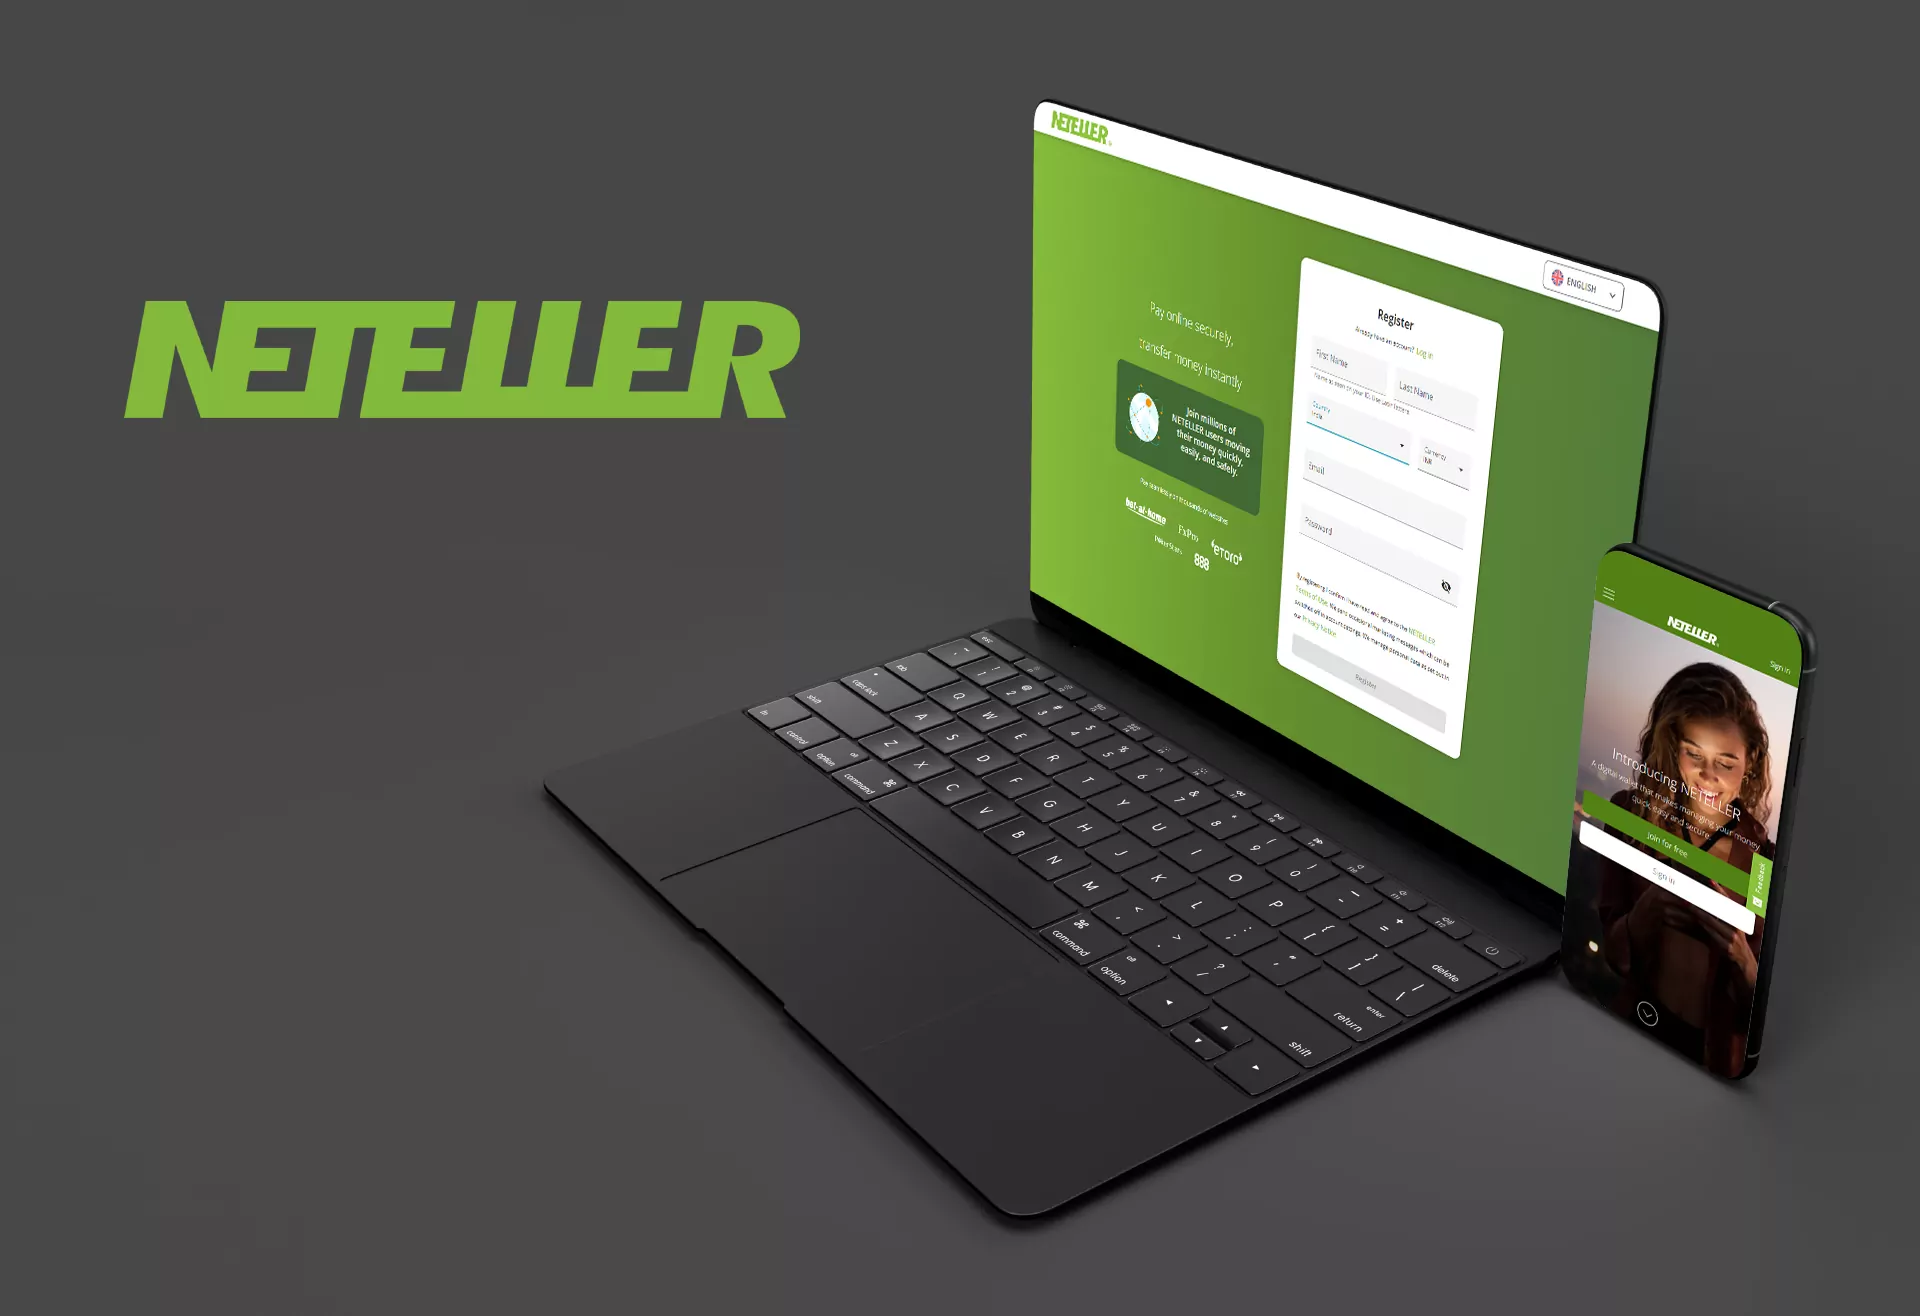 Neteller is another e-wallet that you can use for topping up a betting account and keeping funds of winnings.